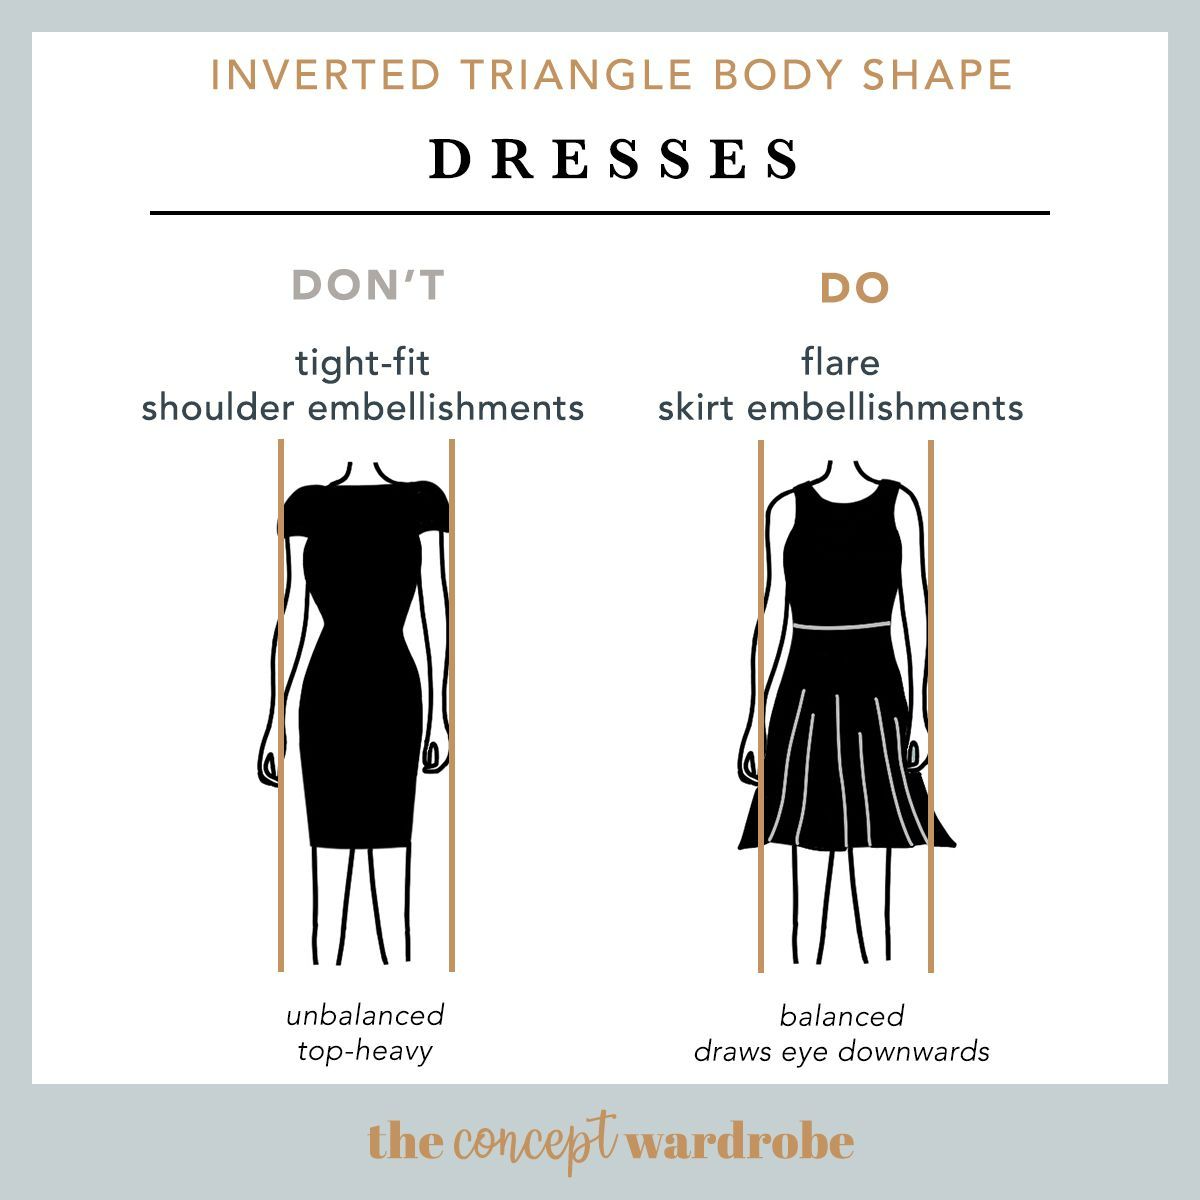 Inverted-triangle-Body-Dress